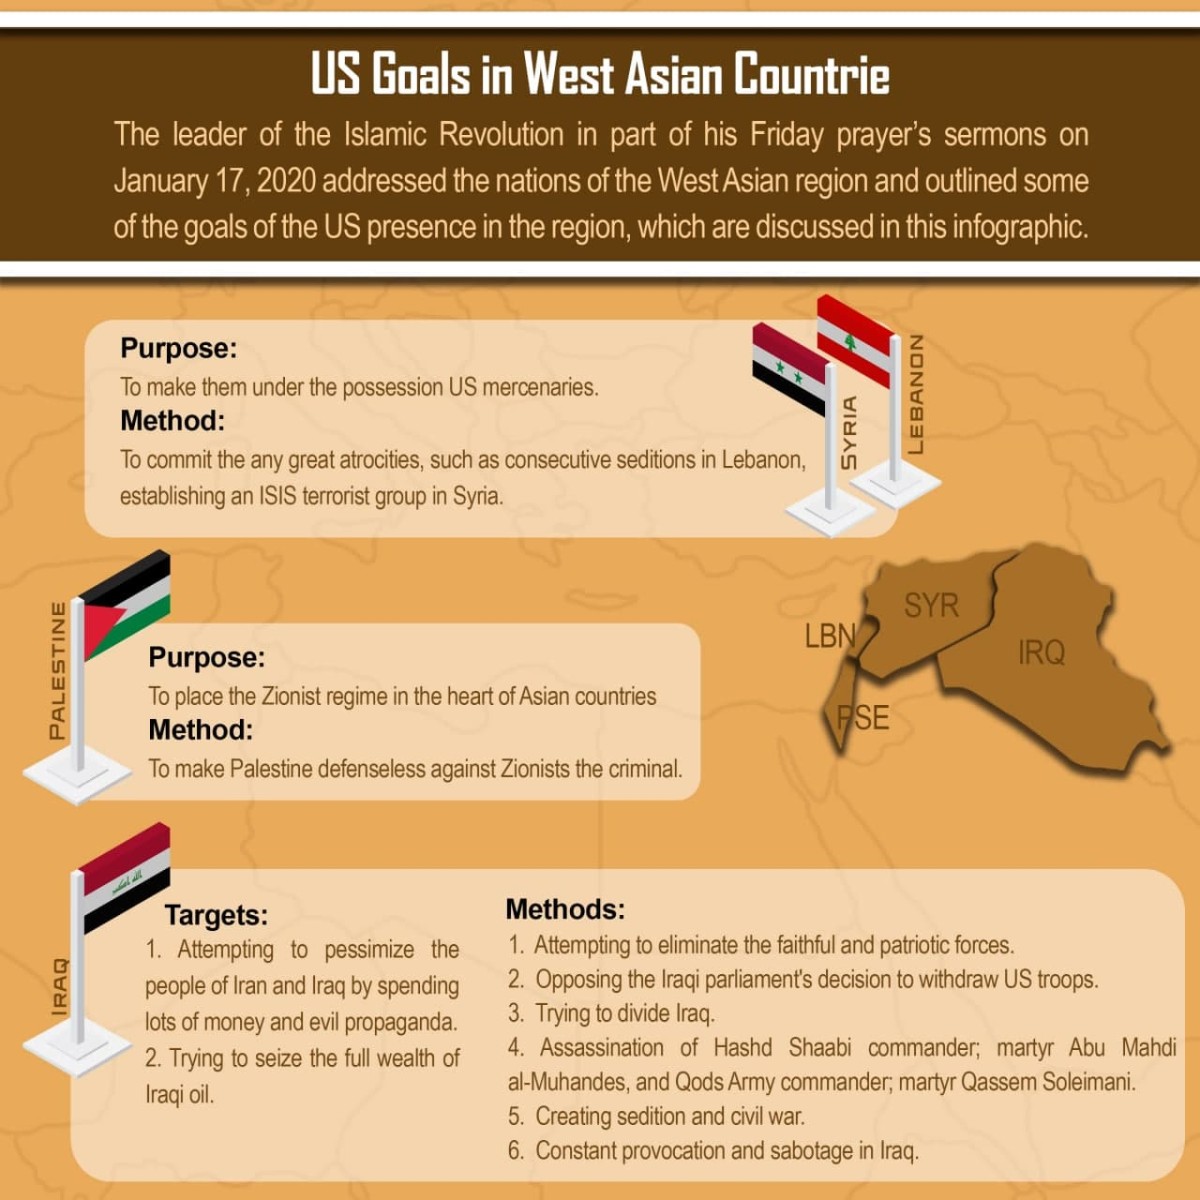 US Goals in West Asian Countries